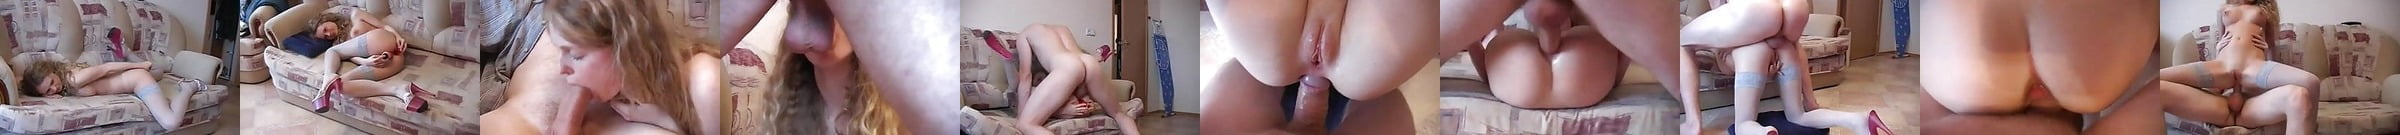 Sex Fun With My Real Flexible Contortion Teen Rag Doll Xhamster